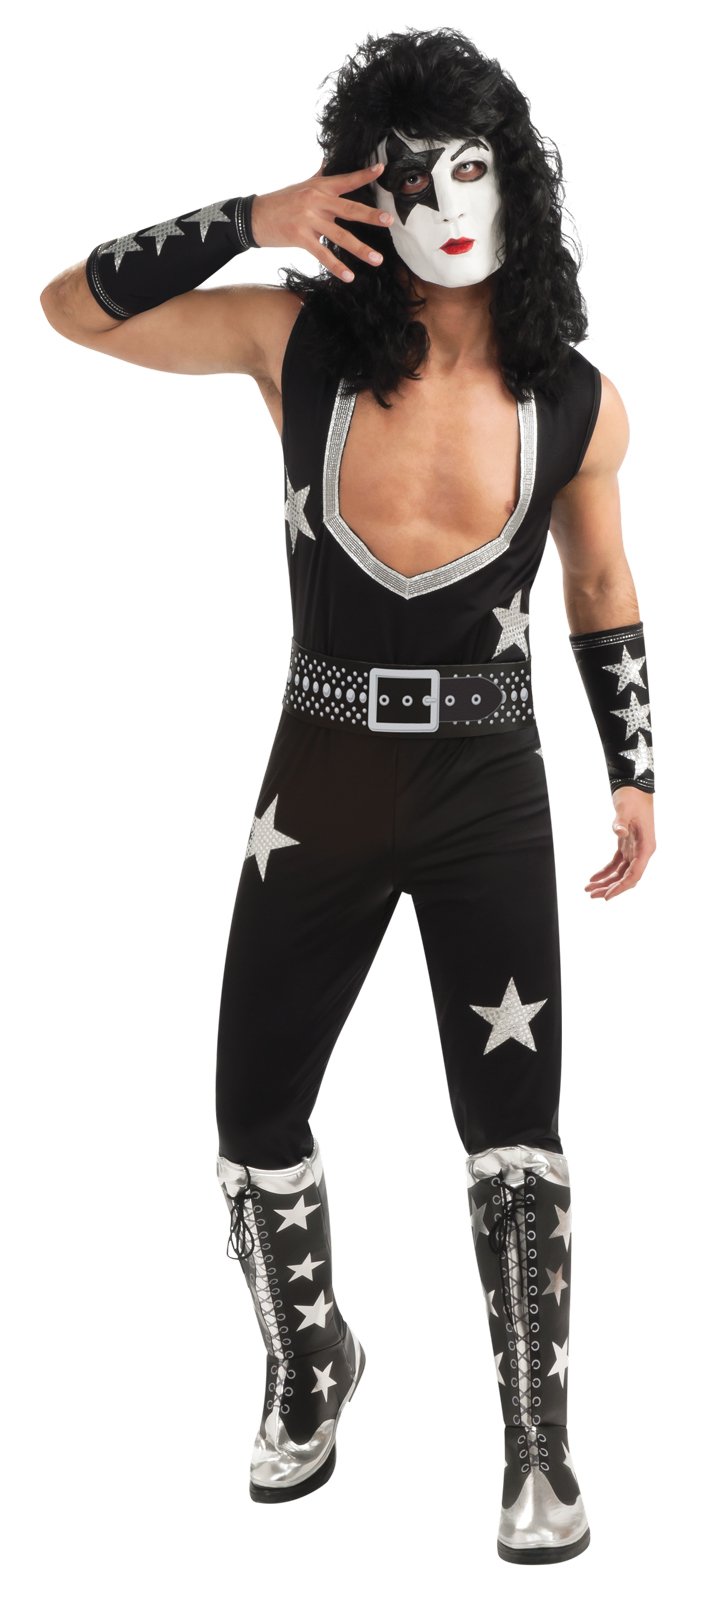 KISS - Starchild Adult Costume - Click Image to Close